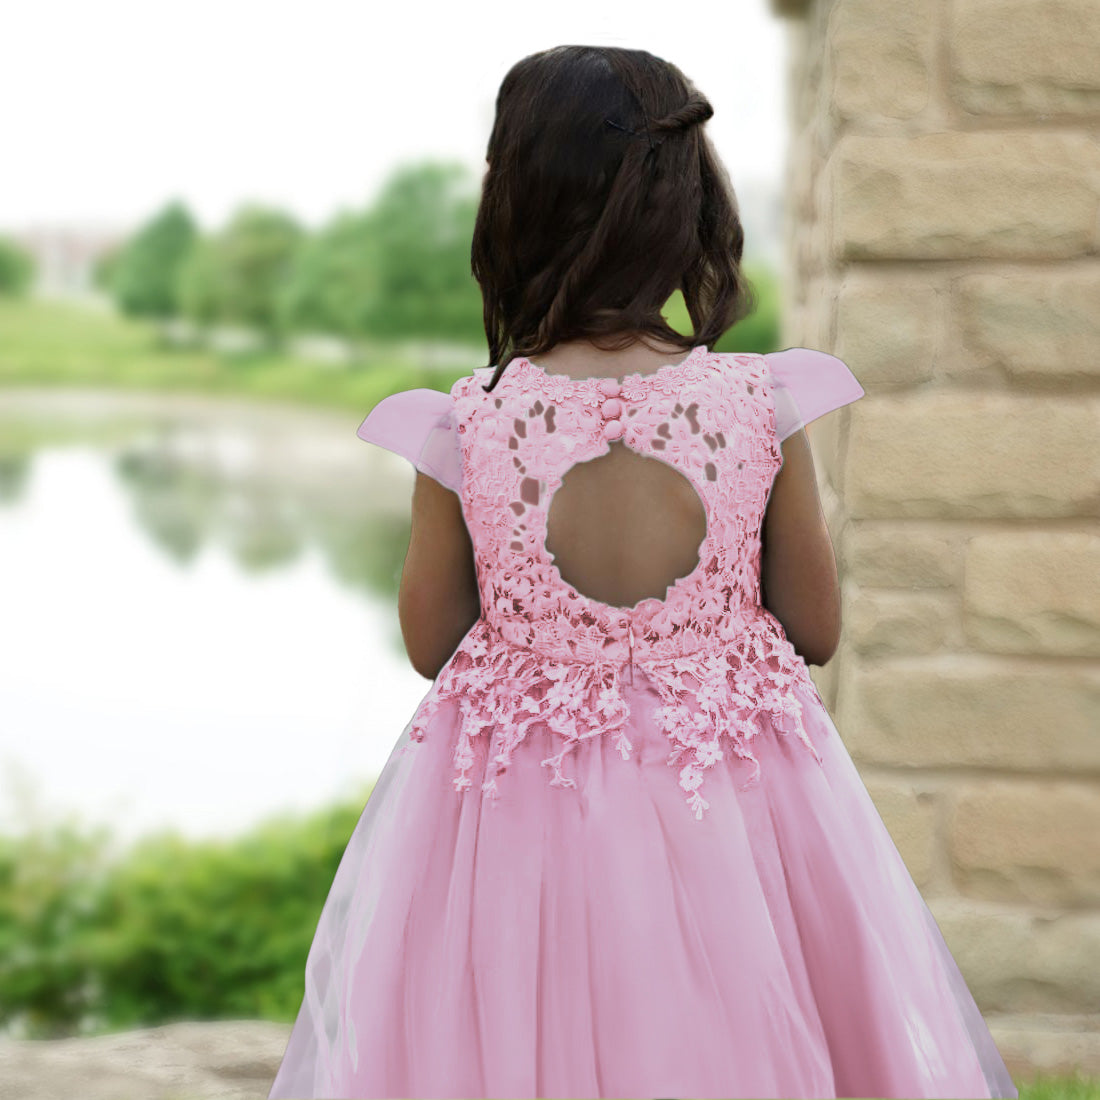 Rose Lace Flower Girl Dress in Blush Pink – 2BUNNIES